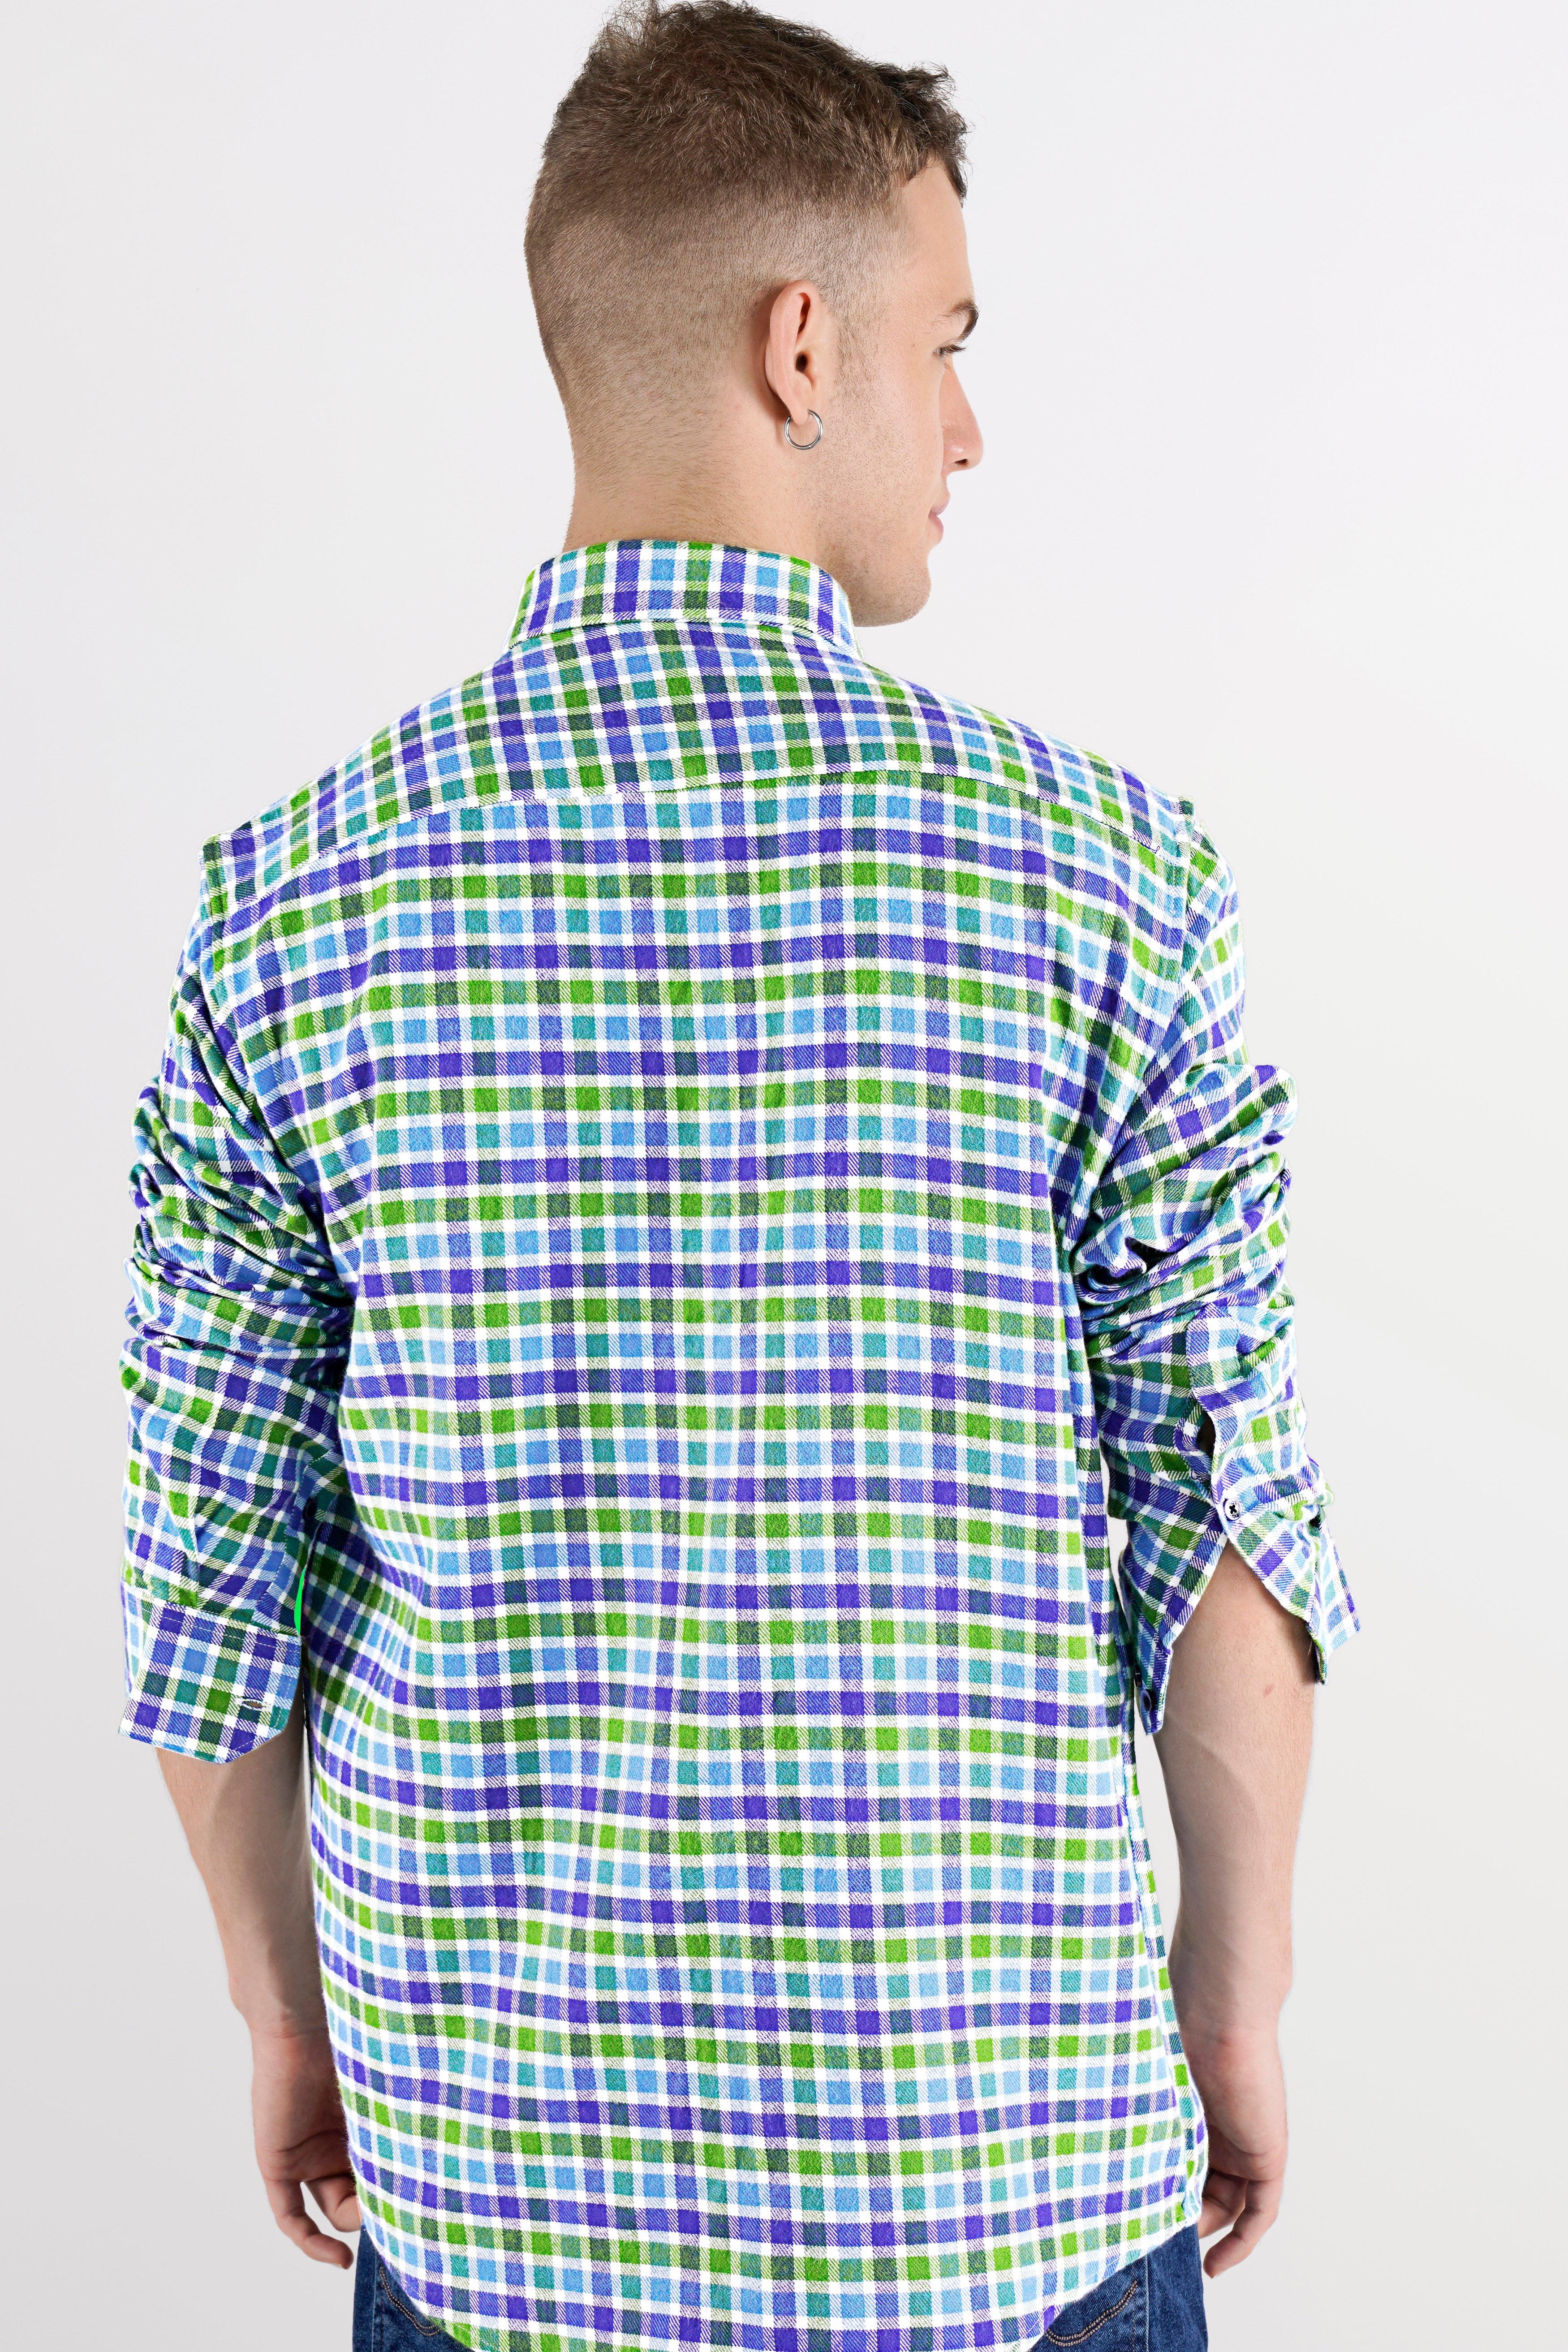 Camo Green with Gigas Blue Checkered Funky Printed Twill Premium Cotton Designer Shirt